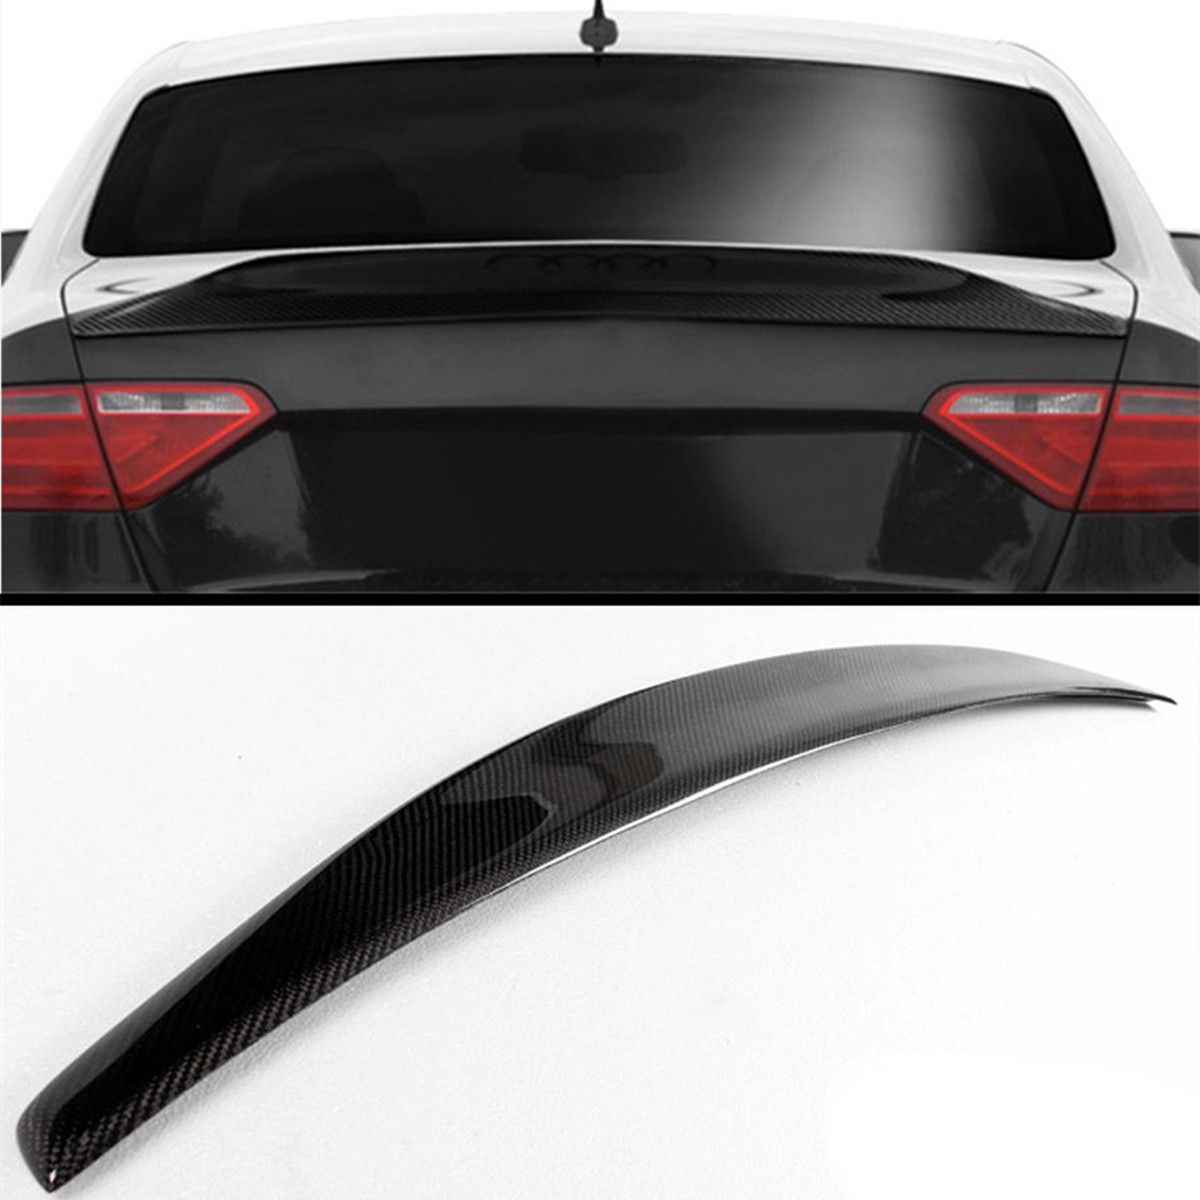 For-Audi-A5-B8-B9-Coupe-08-16-Real-Carbon-Fiber-Trunk-Spoiler-Wing-Lid-Cat-Style-1700182